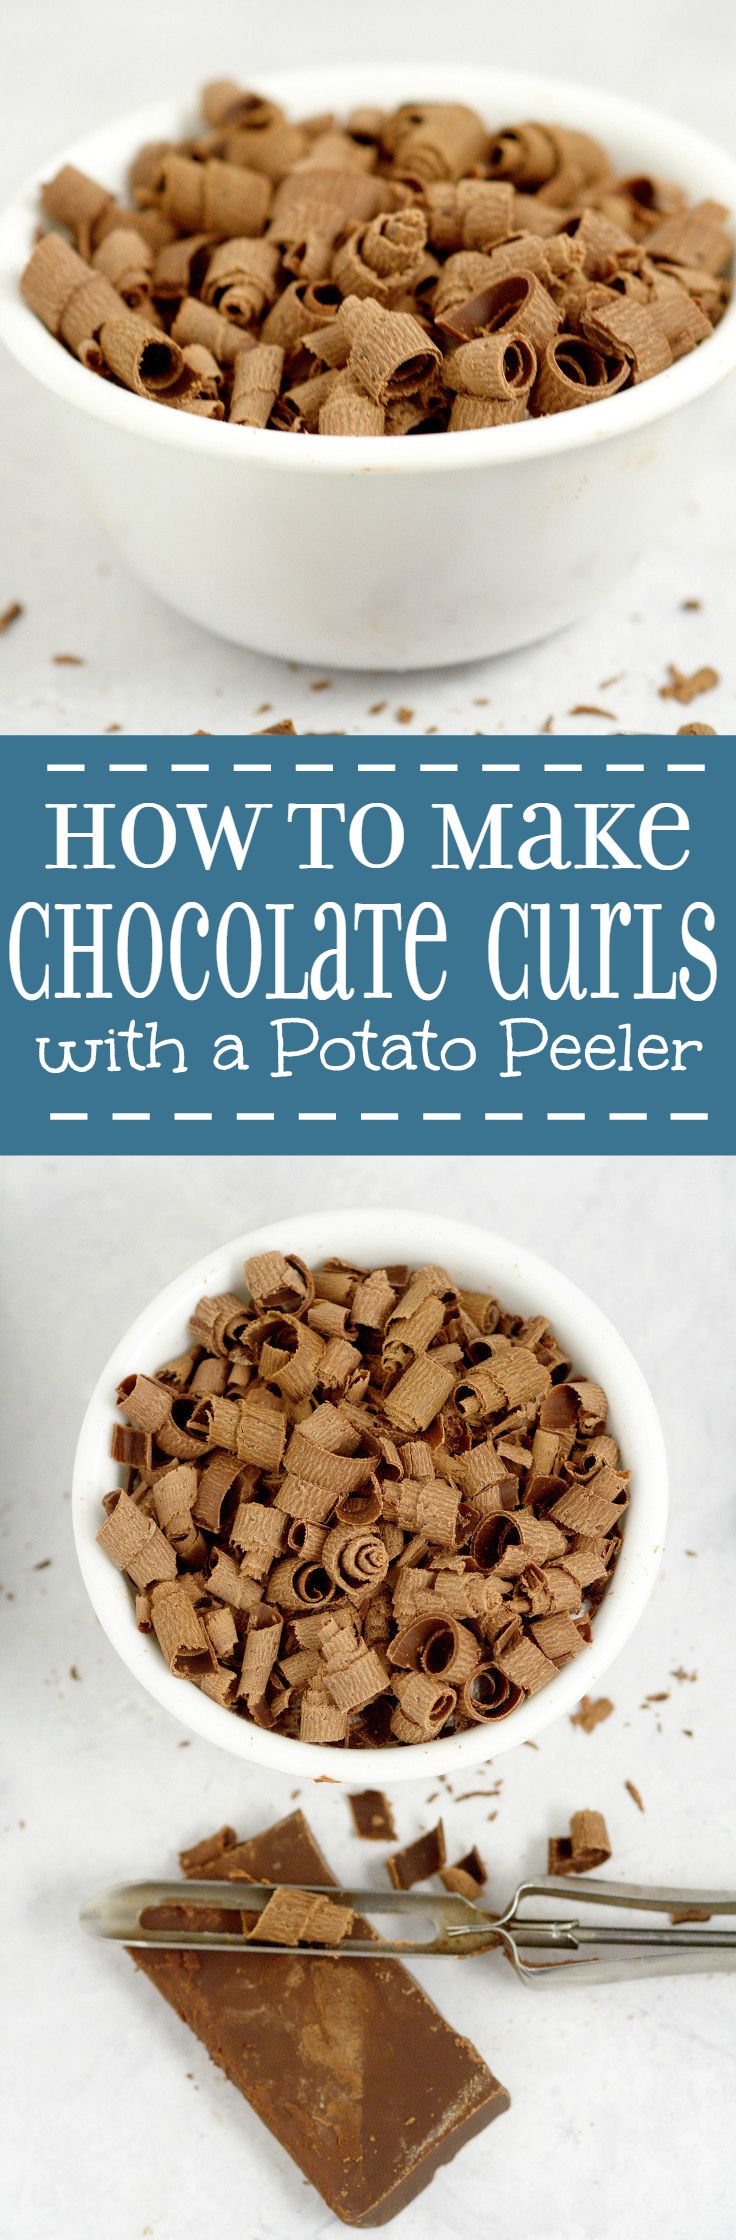 Learn how to make chocolate curls with a potato peeler the easy way for beautiful chocolate curls to complement your desserts!  cooking tips | baking tips | kitchen tips